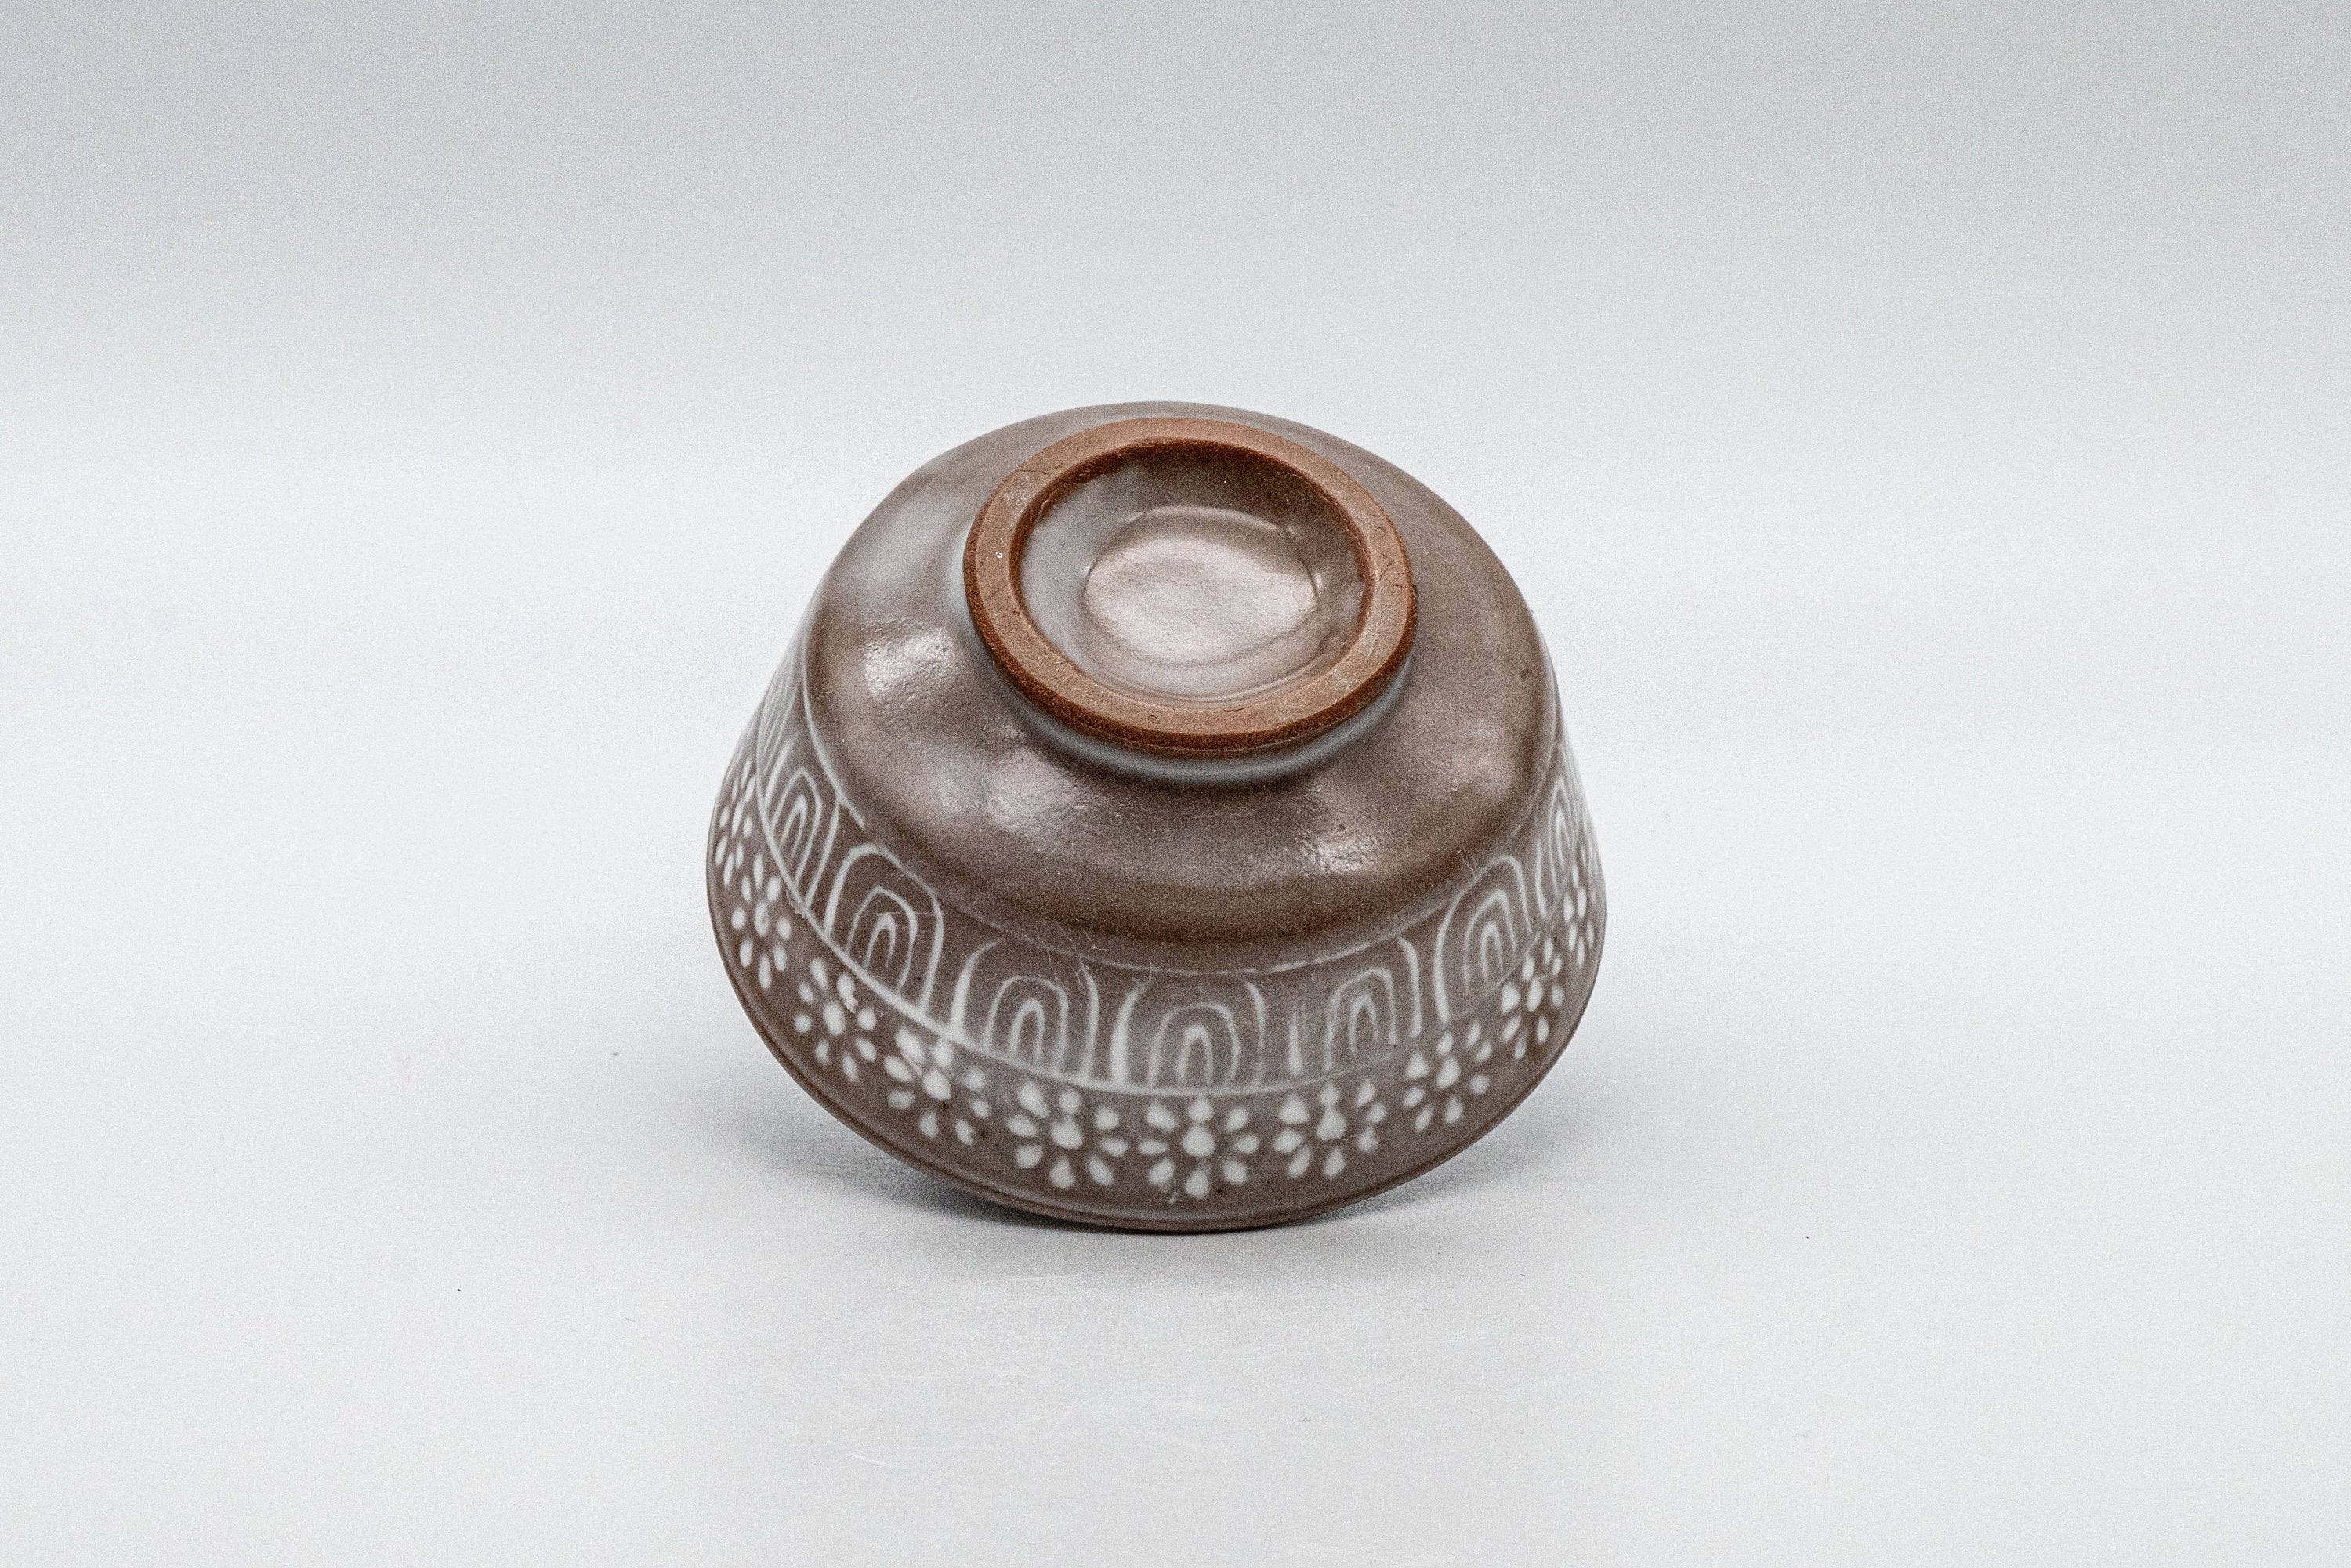 Japanese Teacup - Patterned Shallow Guinomi - 55ml